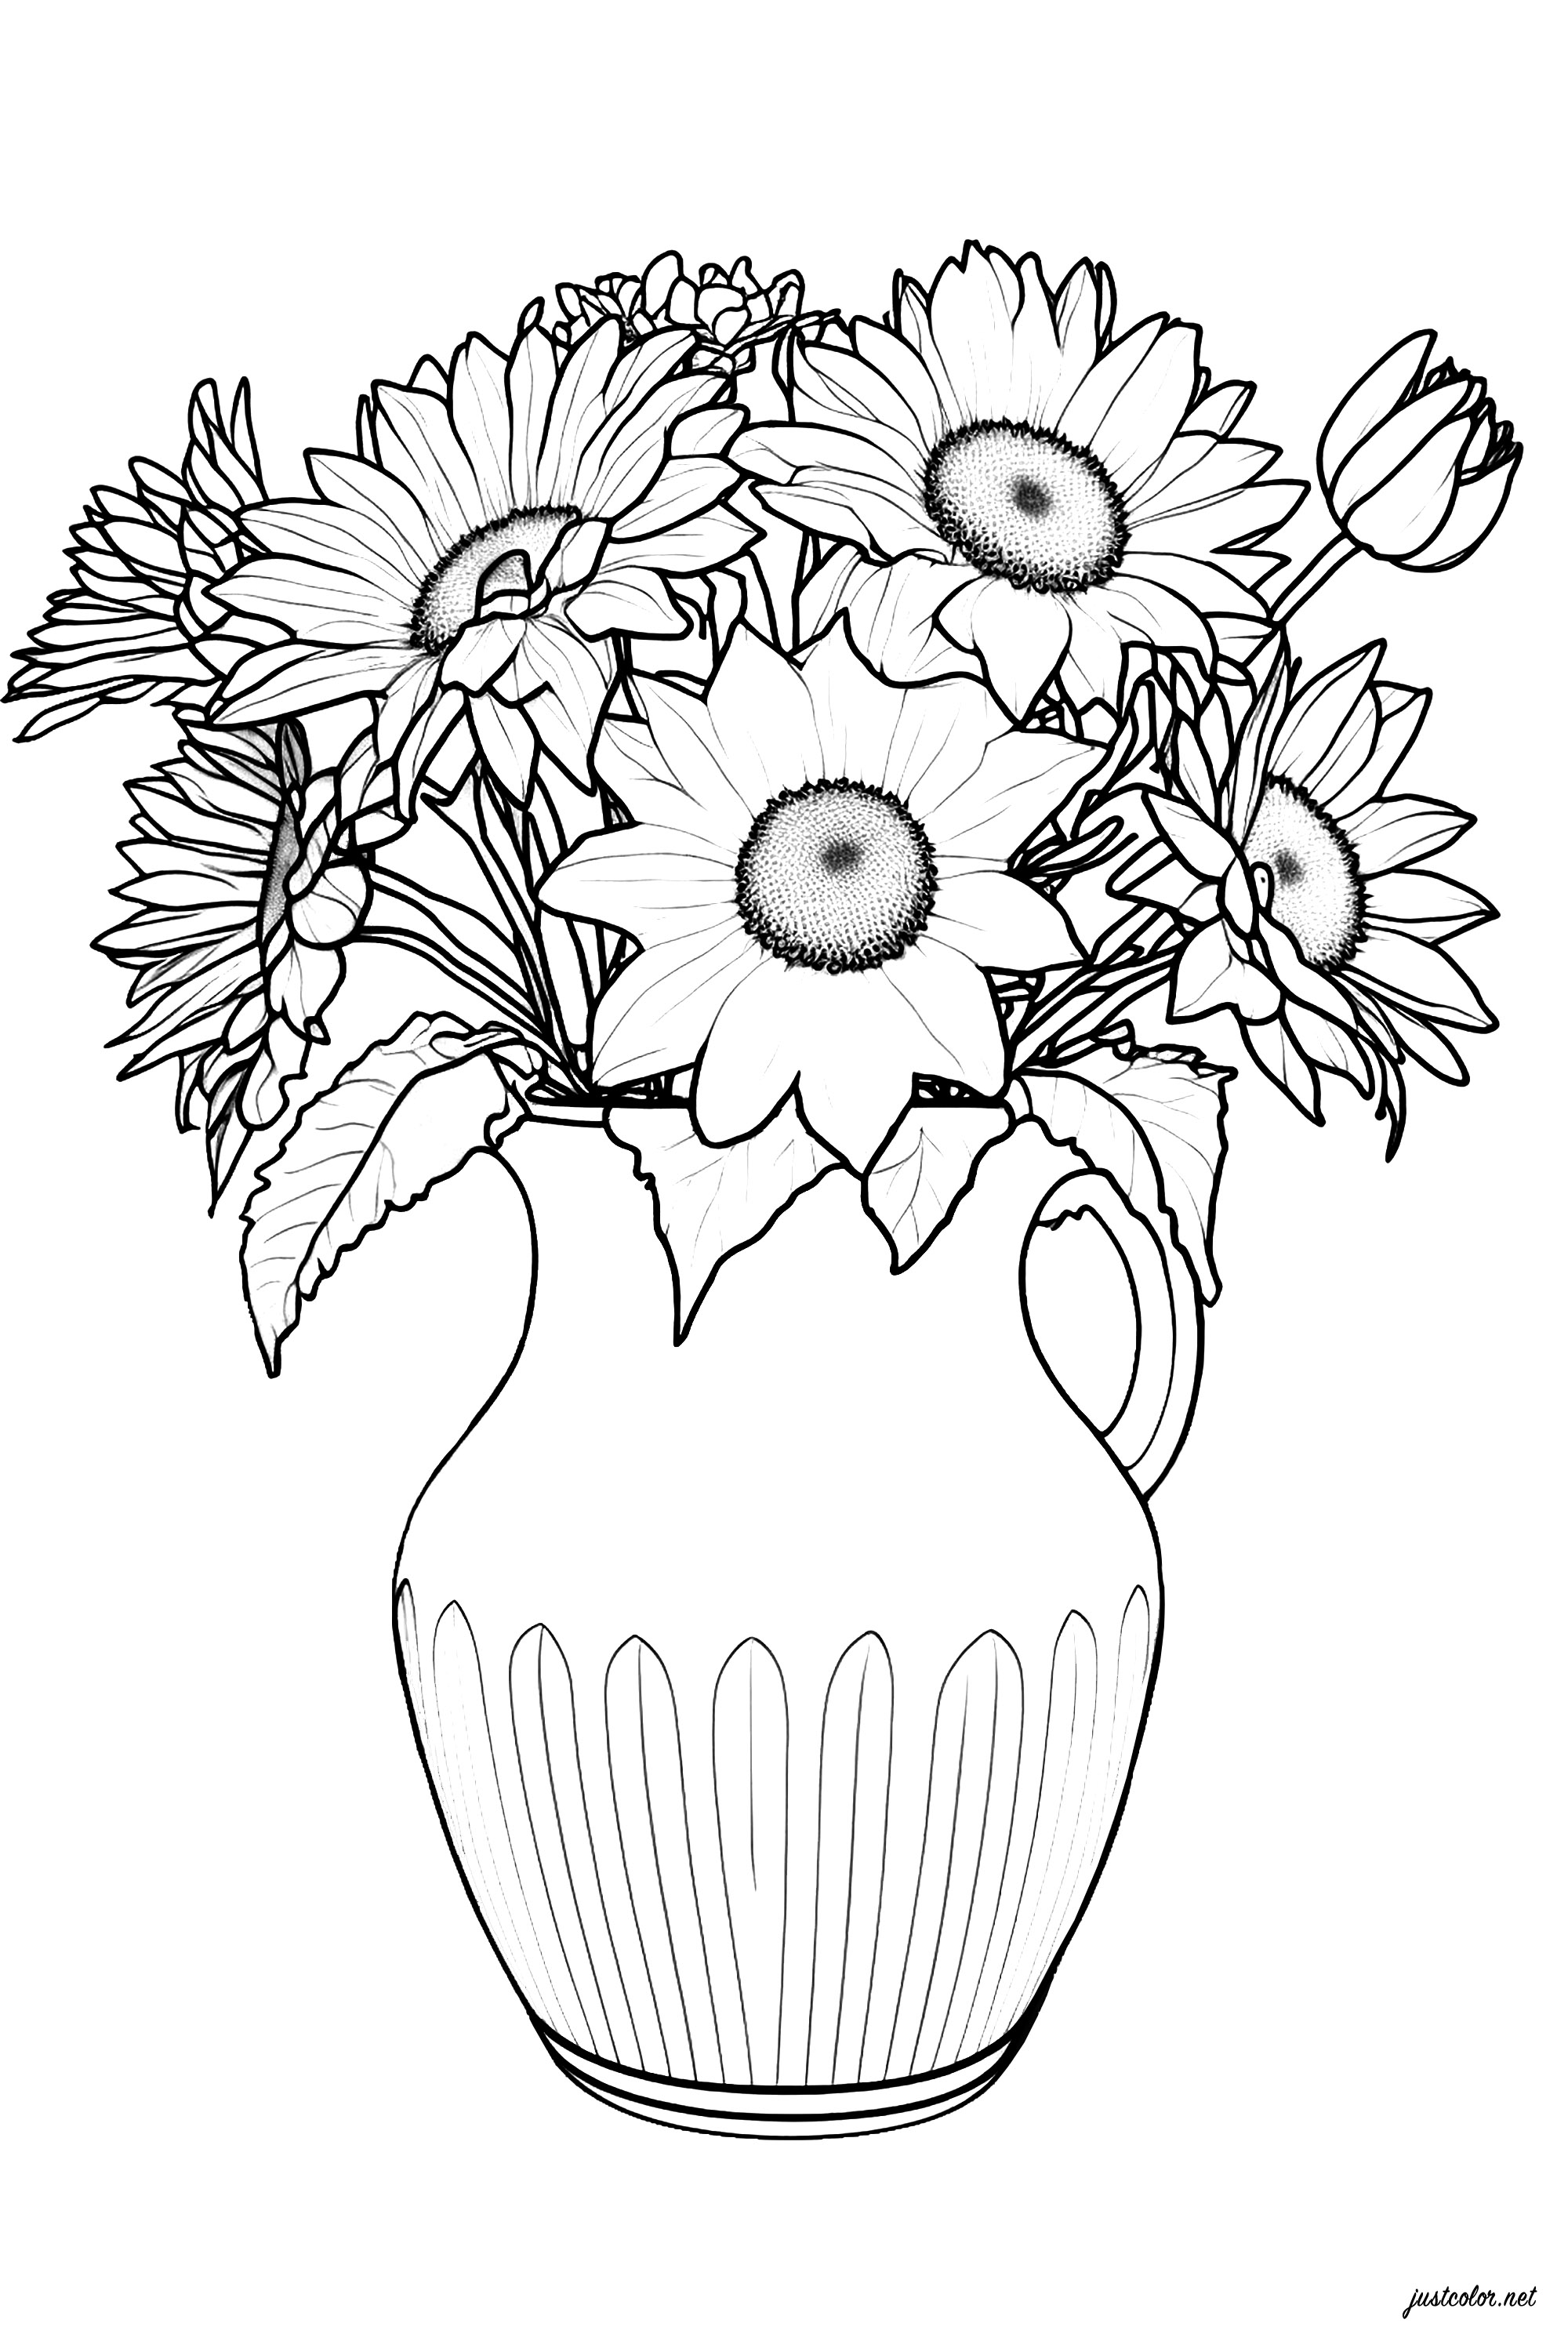 Beautiful flowers in a vase. An absolutely beautiful coloring page depicting a classic vase filled with flowers... to be colored in a variety of bright colors.